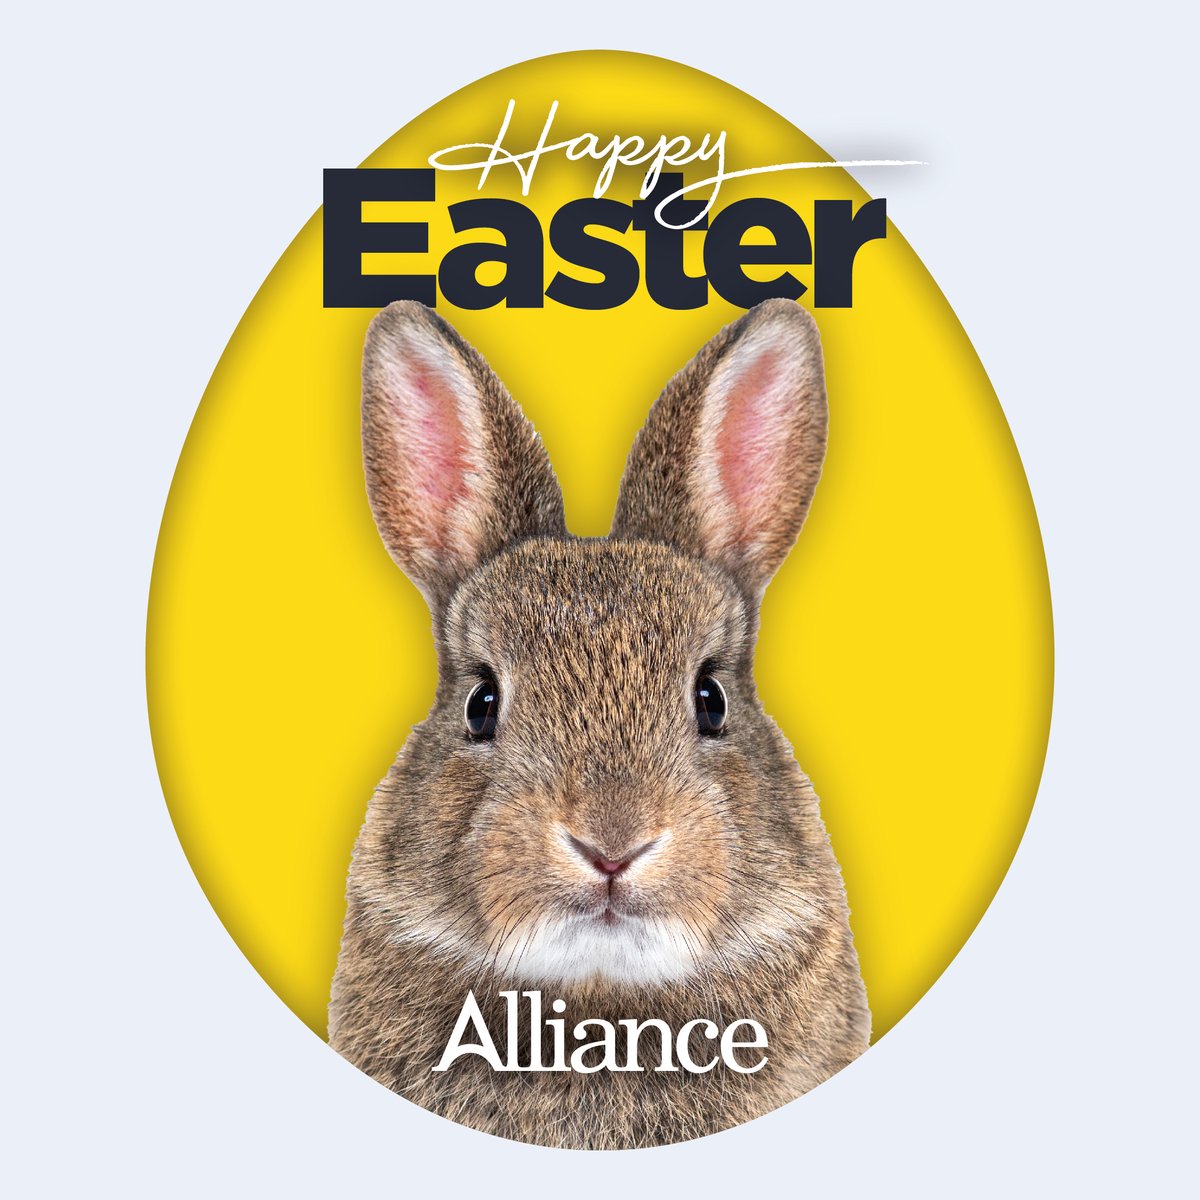 Happy Easter from everyone at Alliance! 🐣